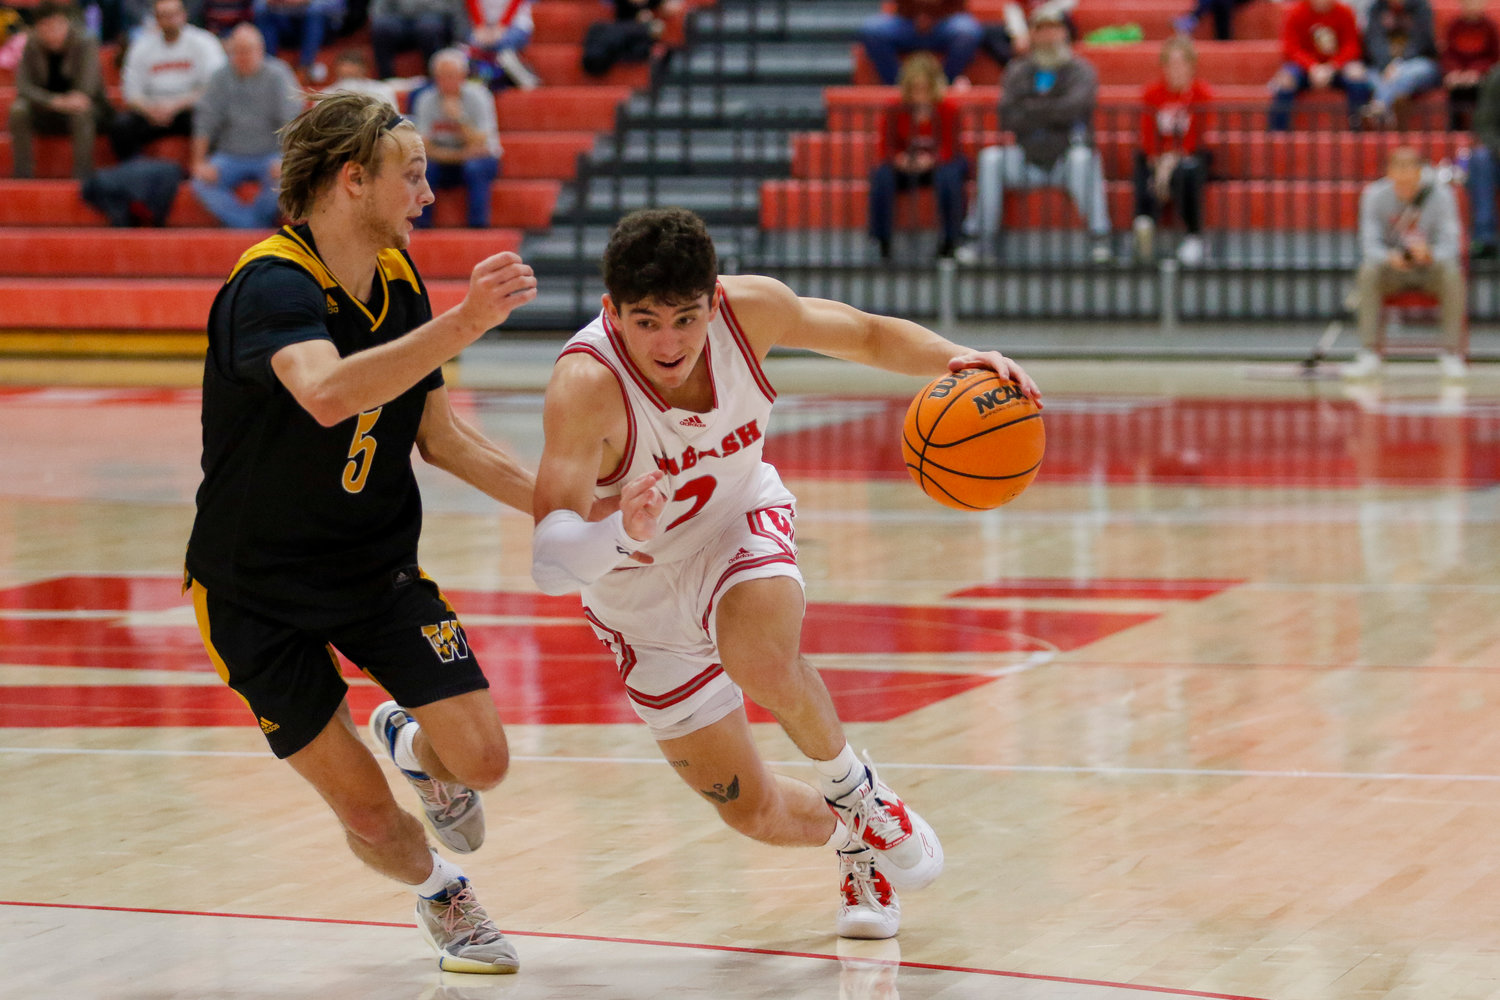 Vinny Buccilla scored 16 points and was a perfect 6-6 from the field as Wabash got a big time 83-68 win over The College of Wooster on Saturday. Wabash, Wooster, and Ohio Wesleyan now sit all 4-1 in the NCAC.